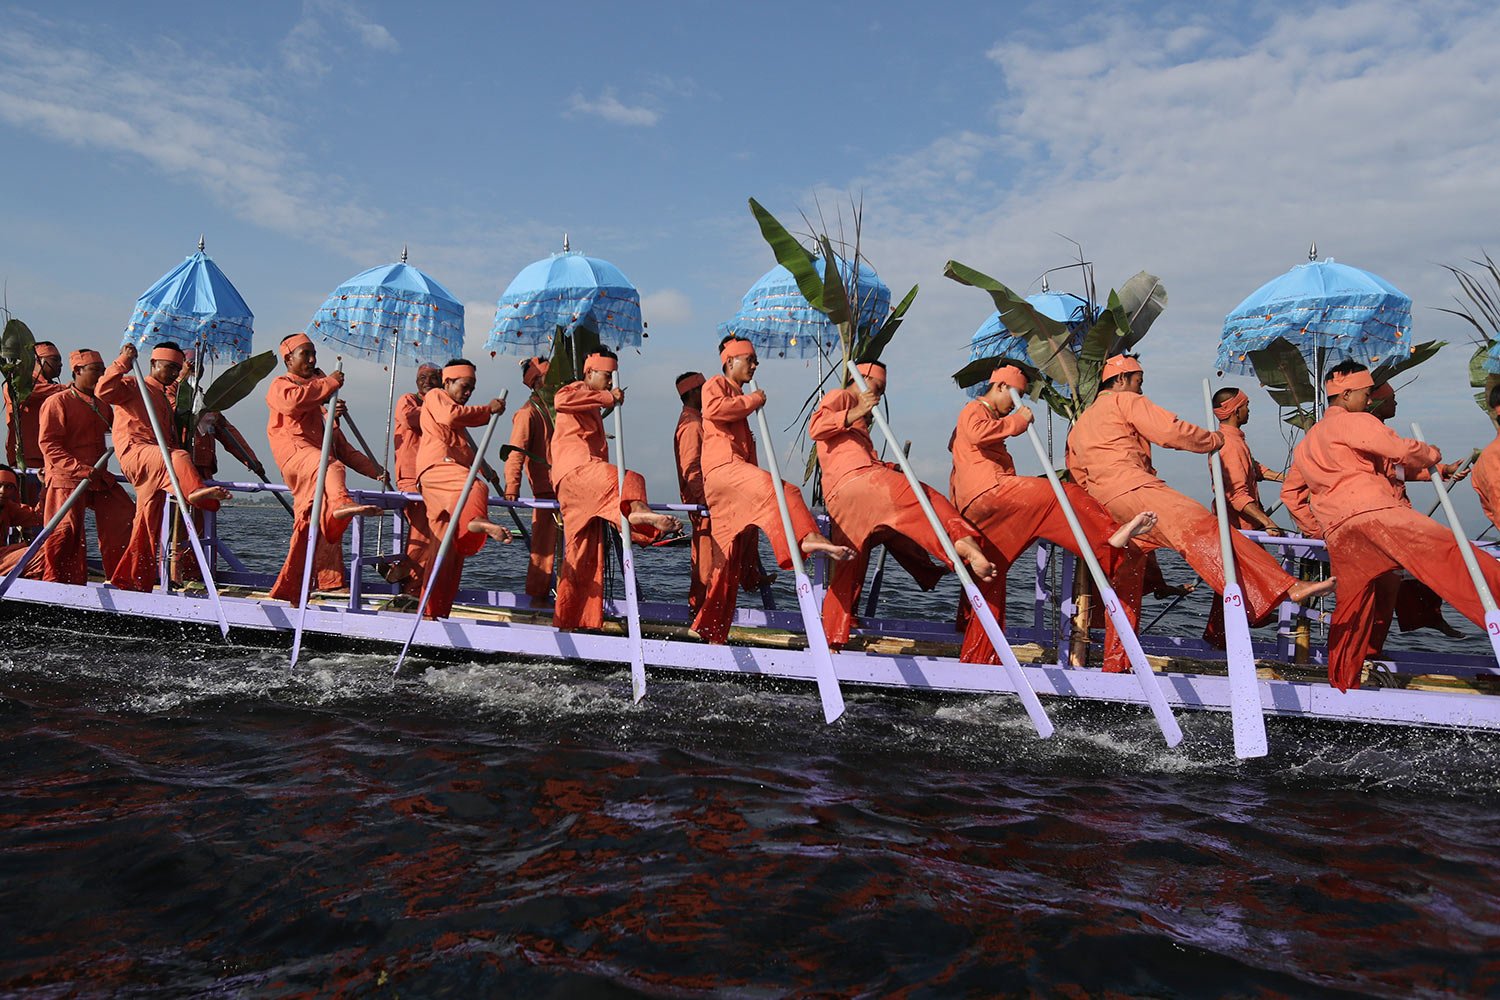  Inntha ethnic people row on a long boat in a procession carrying Buddha images to a monastery during the pagoda festival Thursday, Oct. 19, 2023, in Inlay Lake, southern Shan State, Myanmar. (AP Photo/Thein Zaw) 